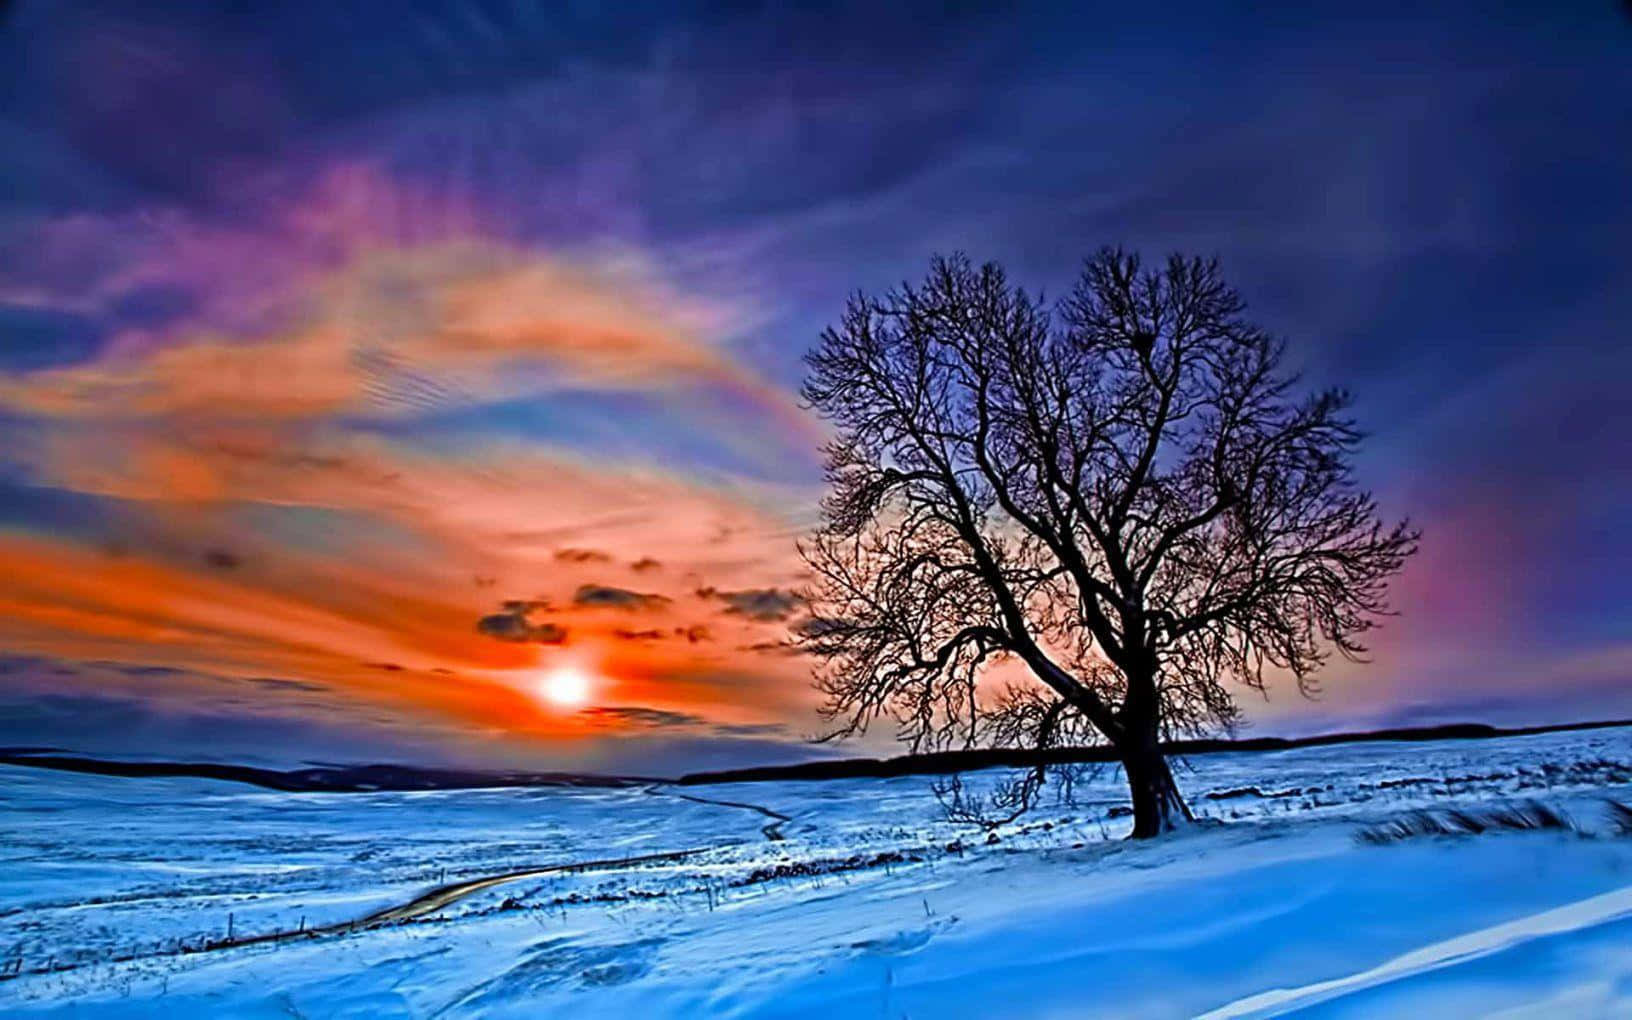 Best Winter Background – Capturing the Beauty of the Season